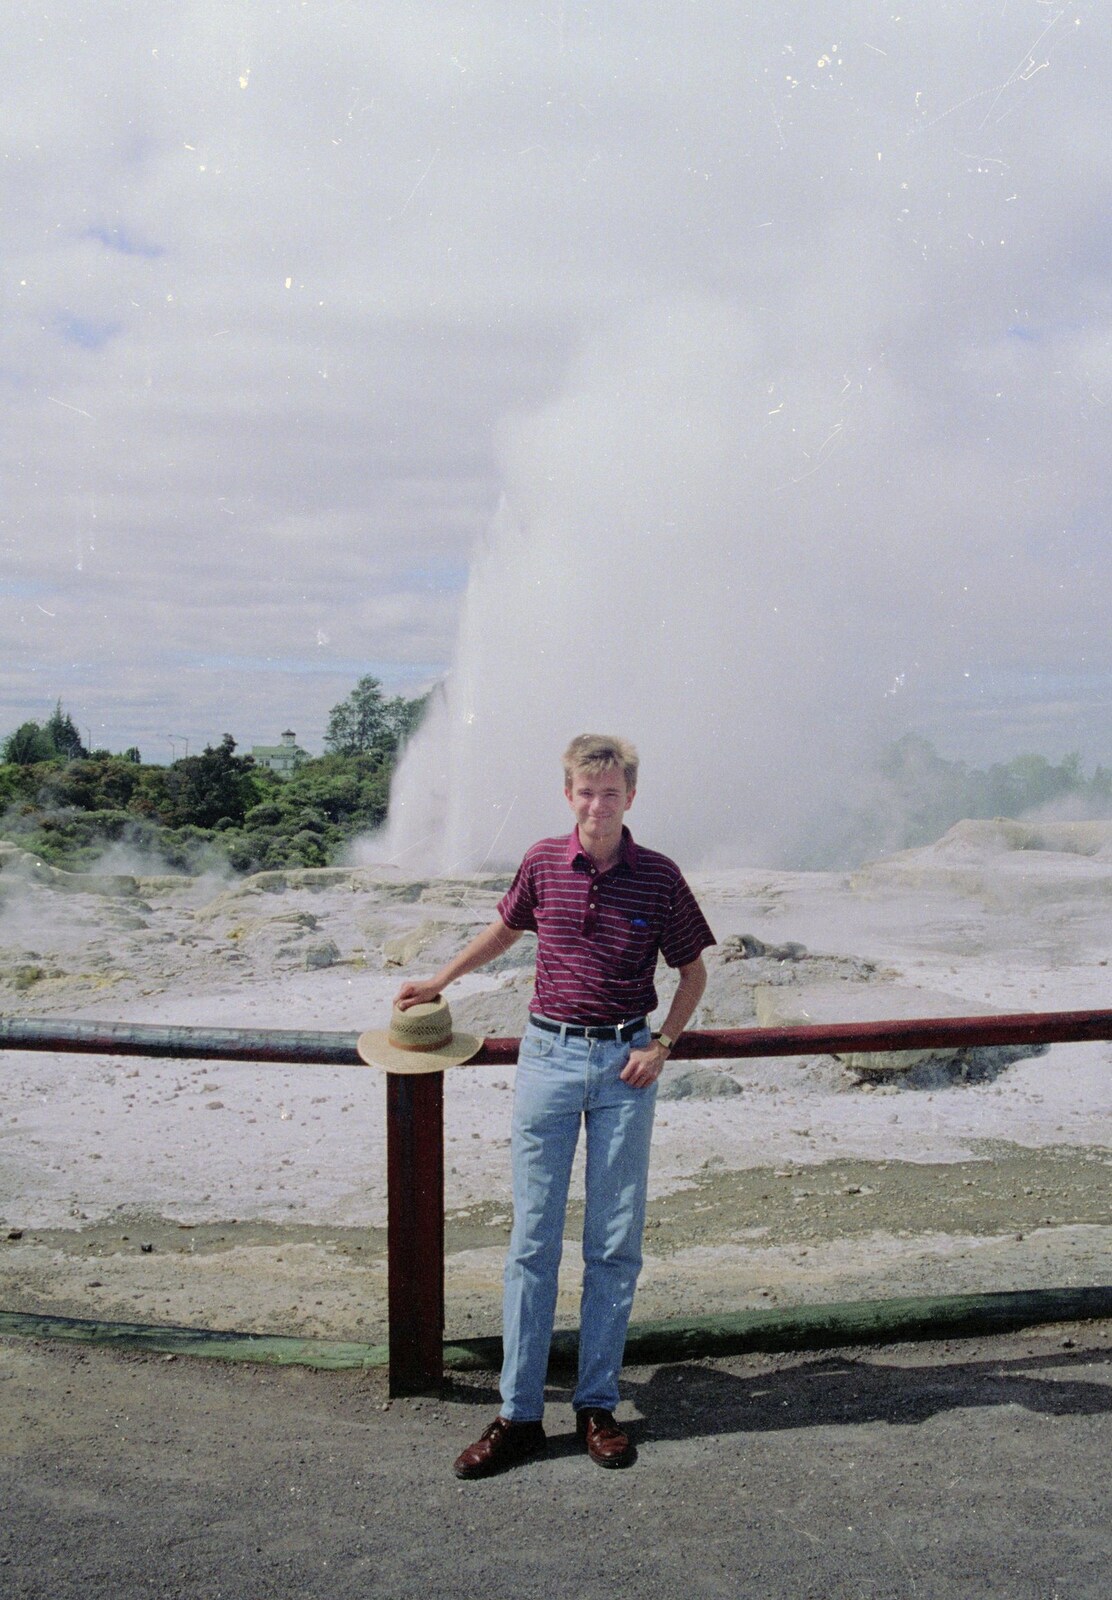 Nosher and hat in front of a geyser from A Road-trip Through Rotorua to Palmerston, North Island, New Zealand - 27th November 1992